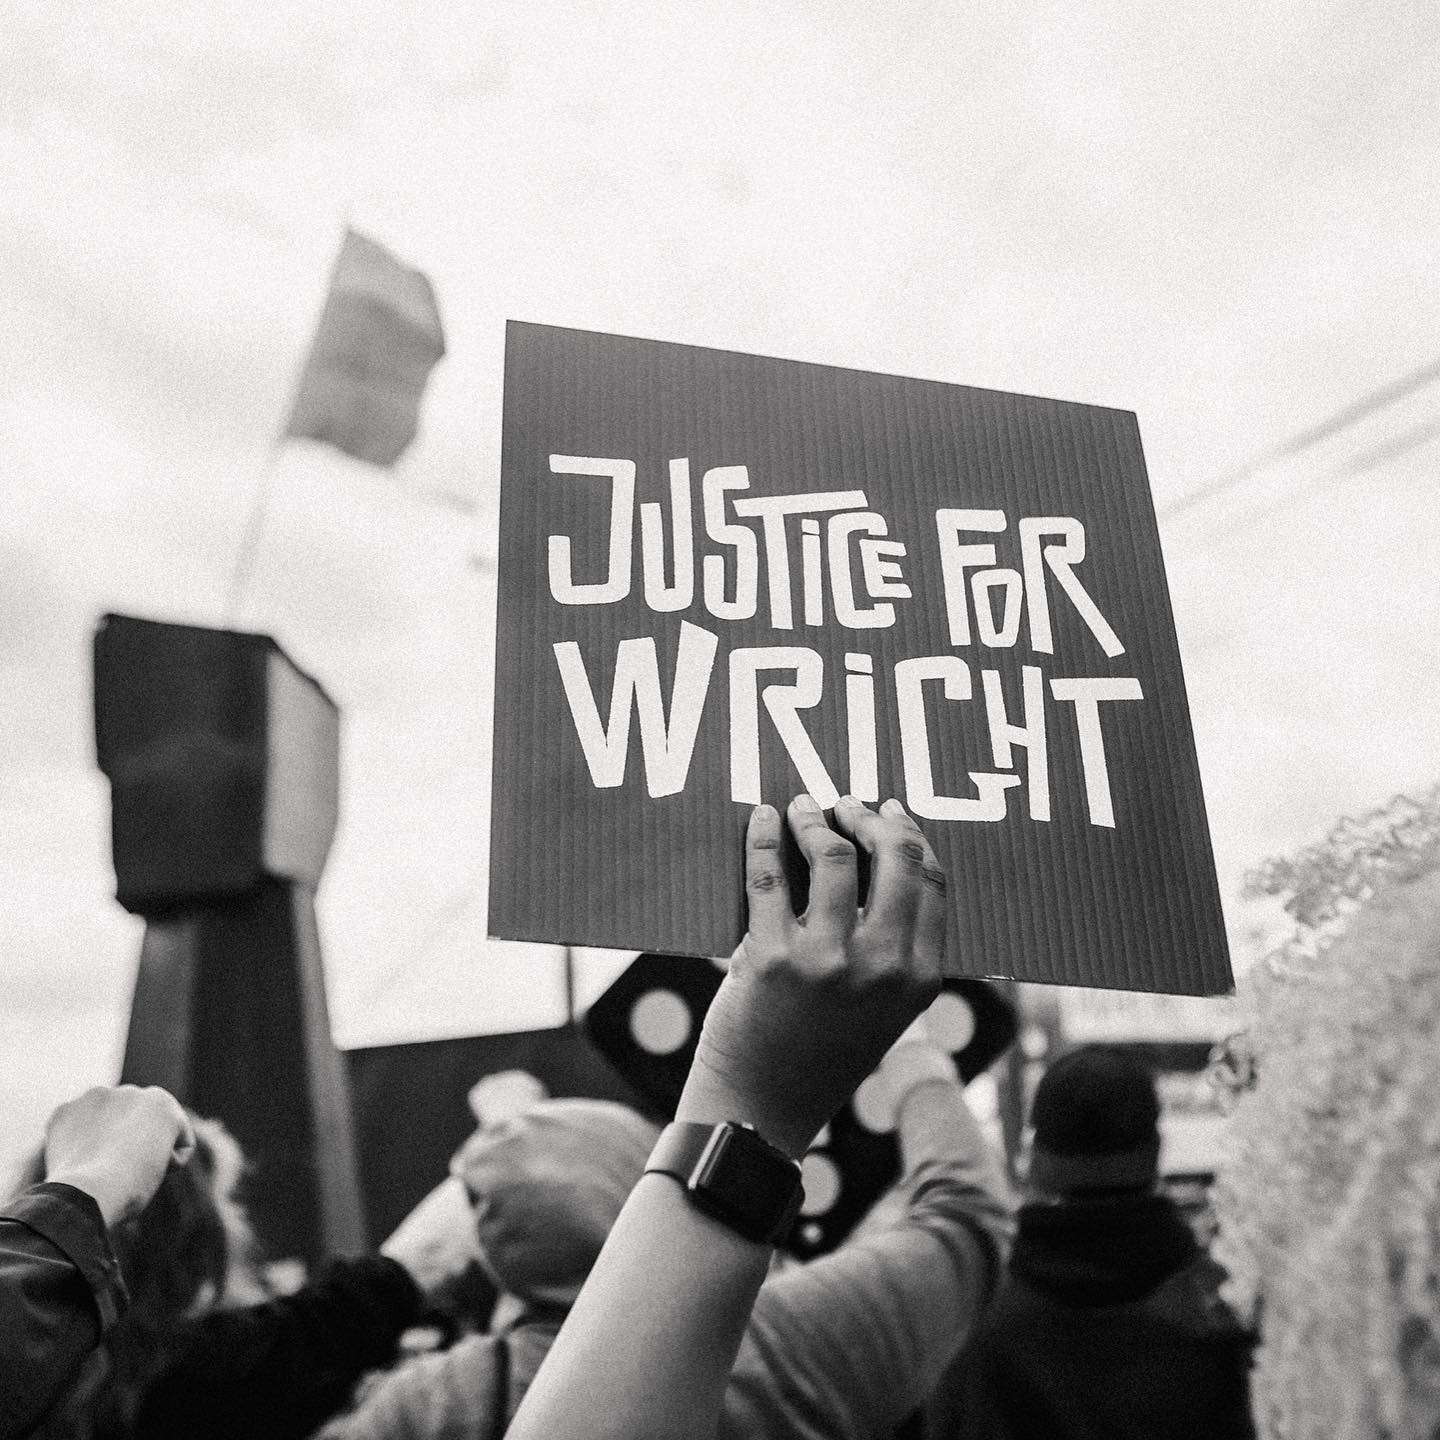 Person holding sign with words "Justice for Wright"